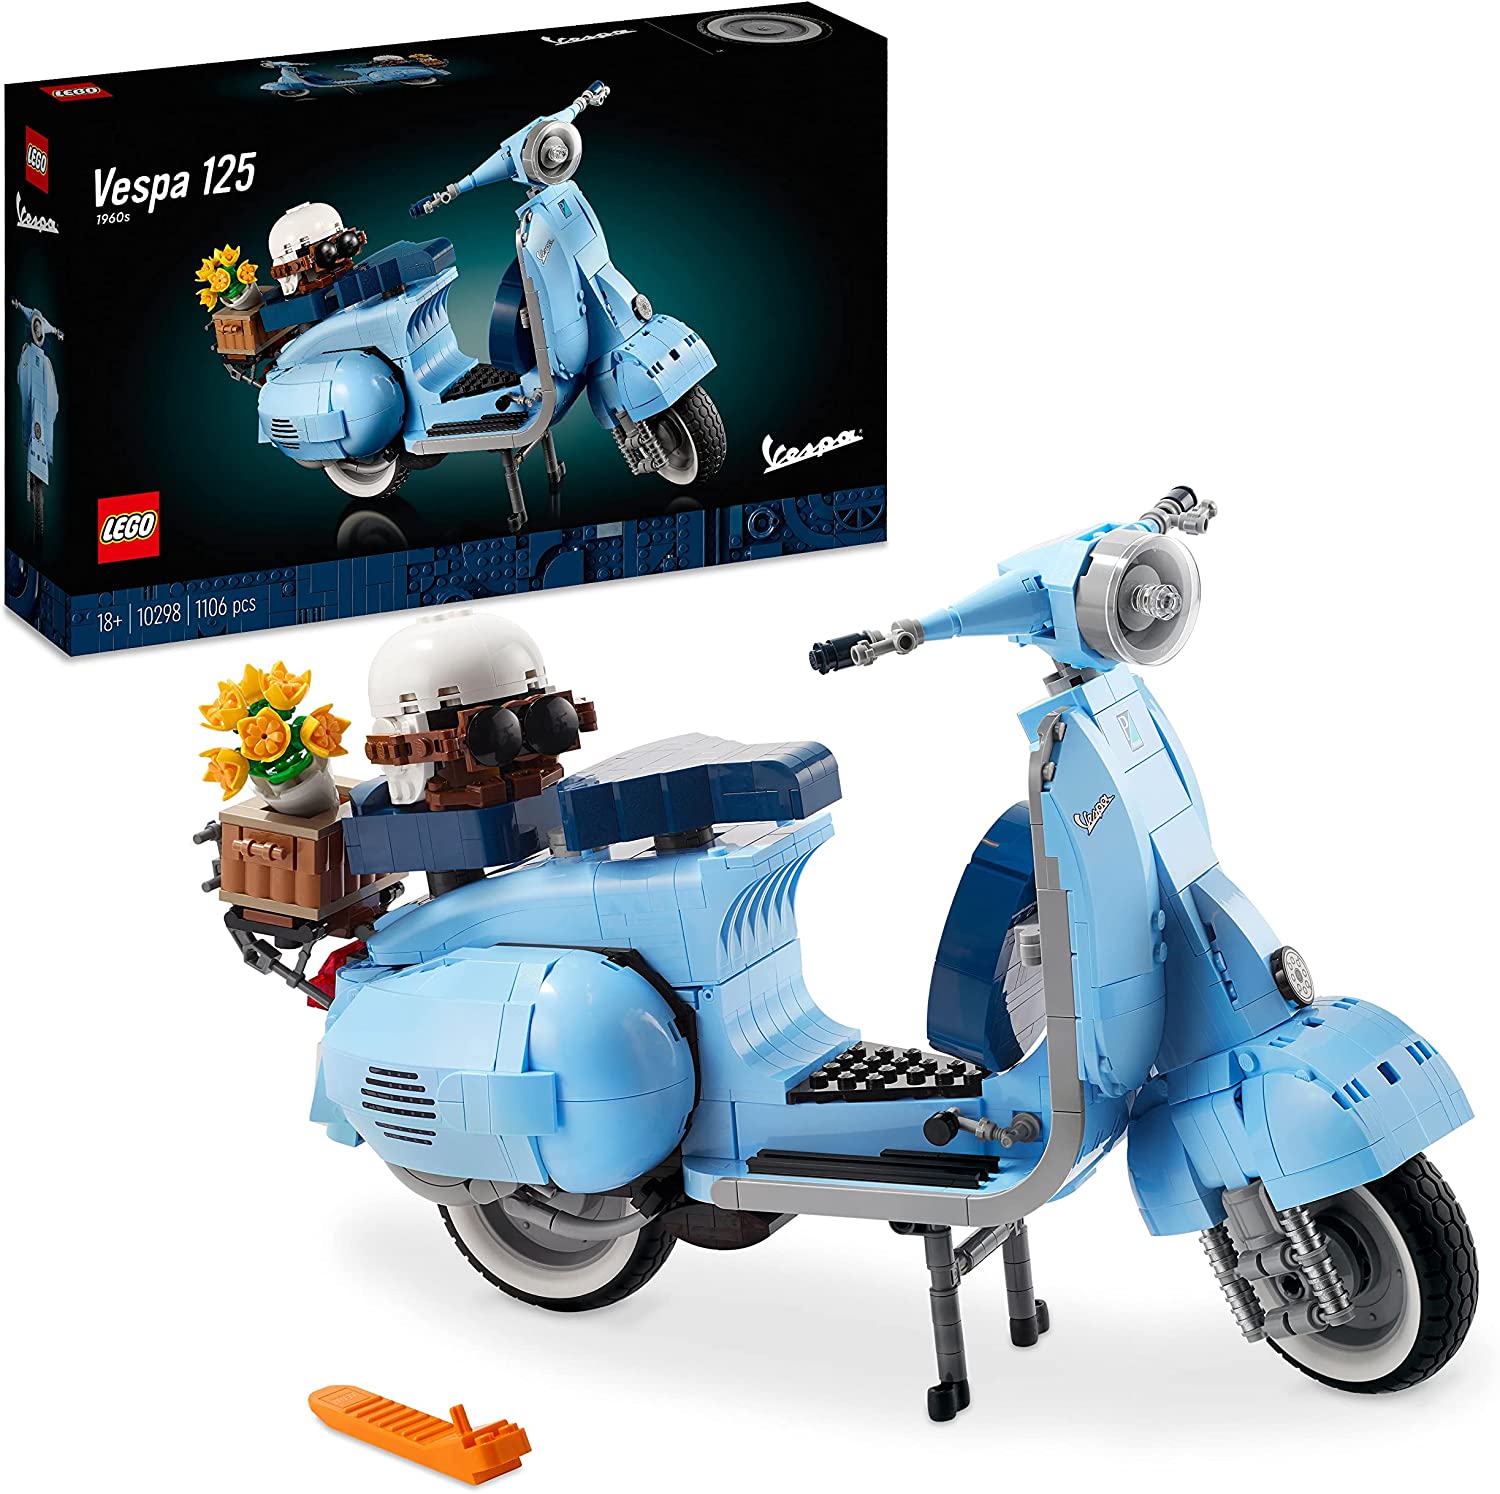 LEGO 10298 Vespa 125 Model Kit, Vintage Scooter from Italy, Set for Adults 